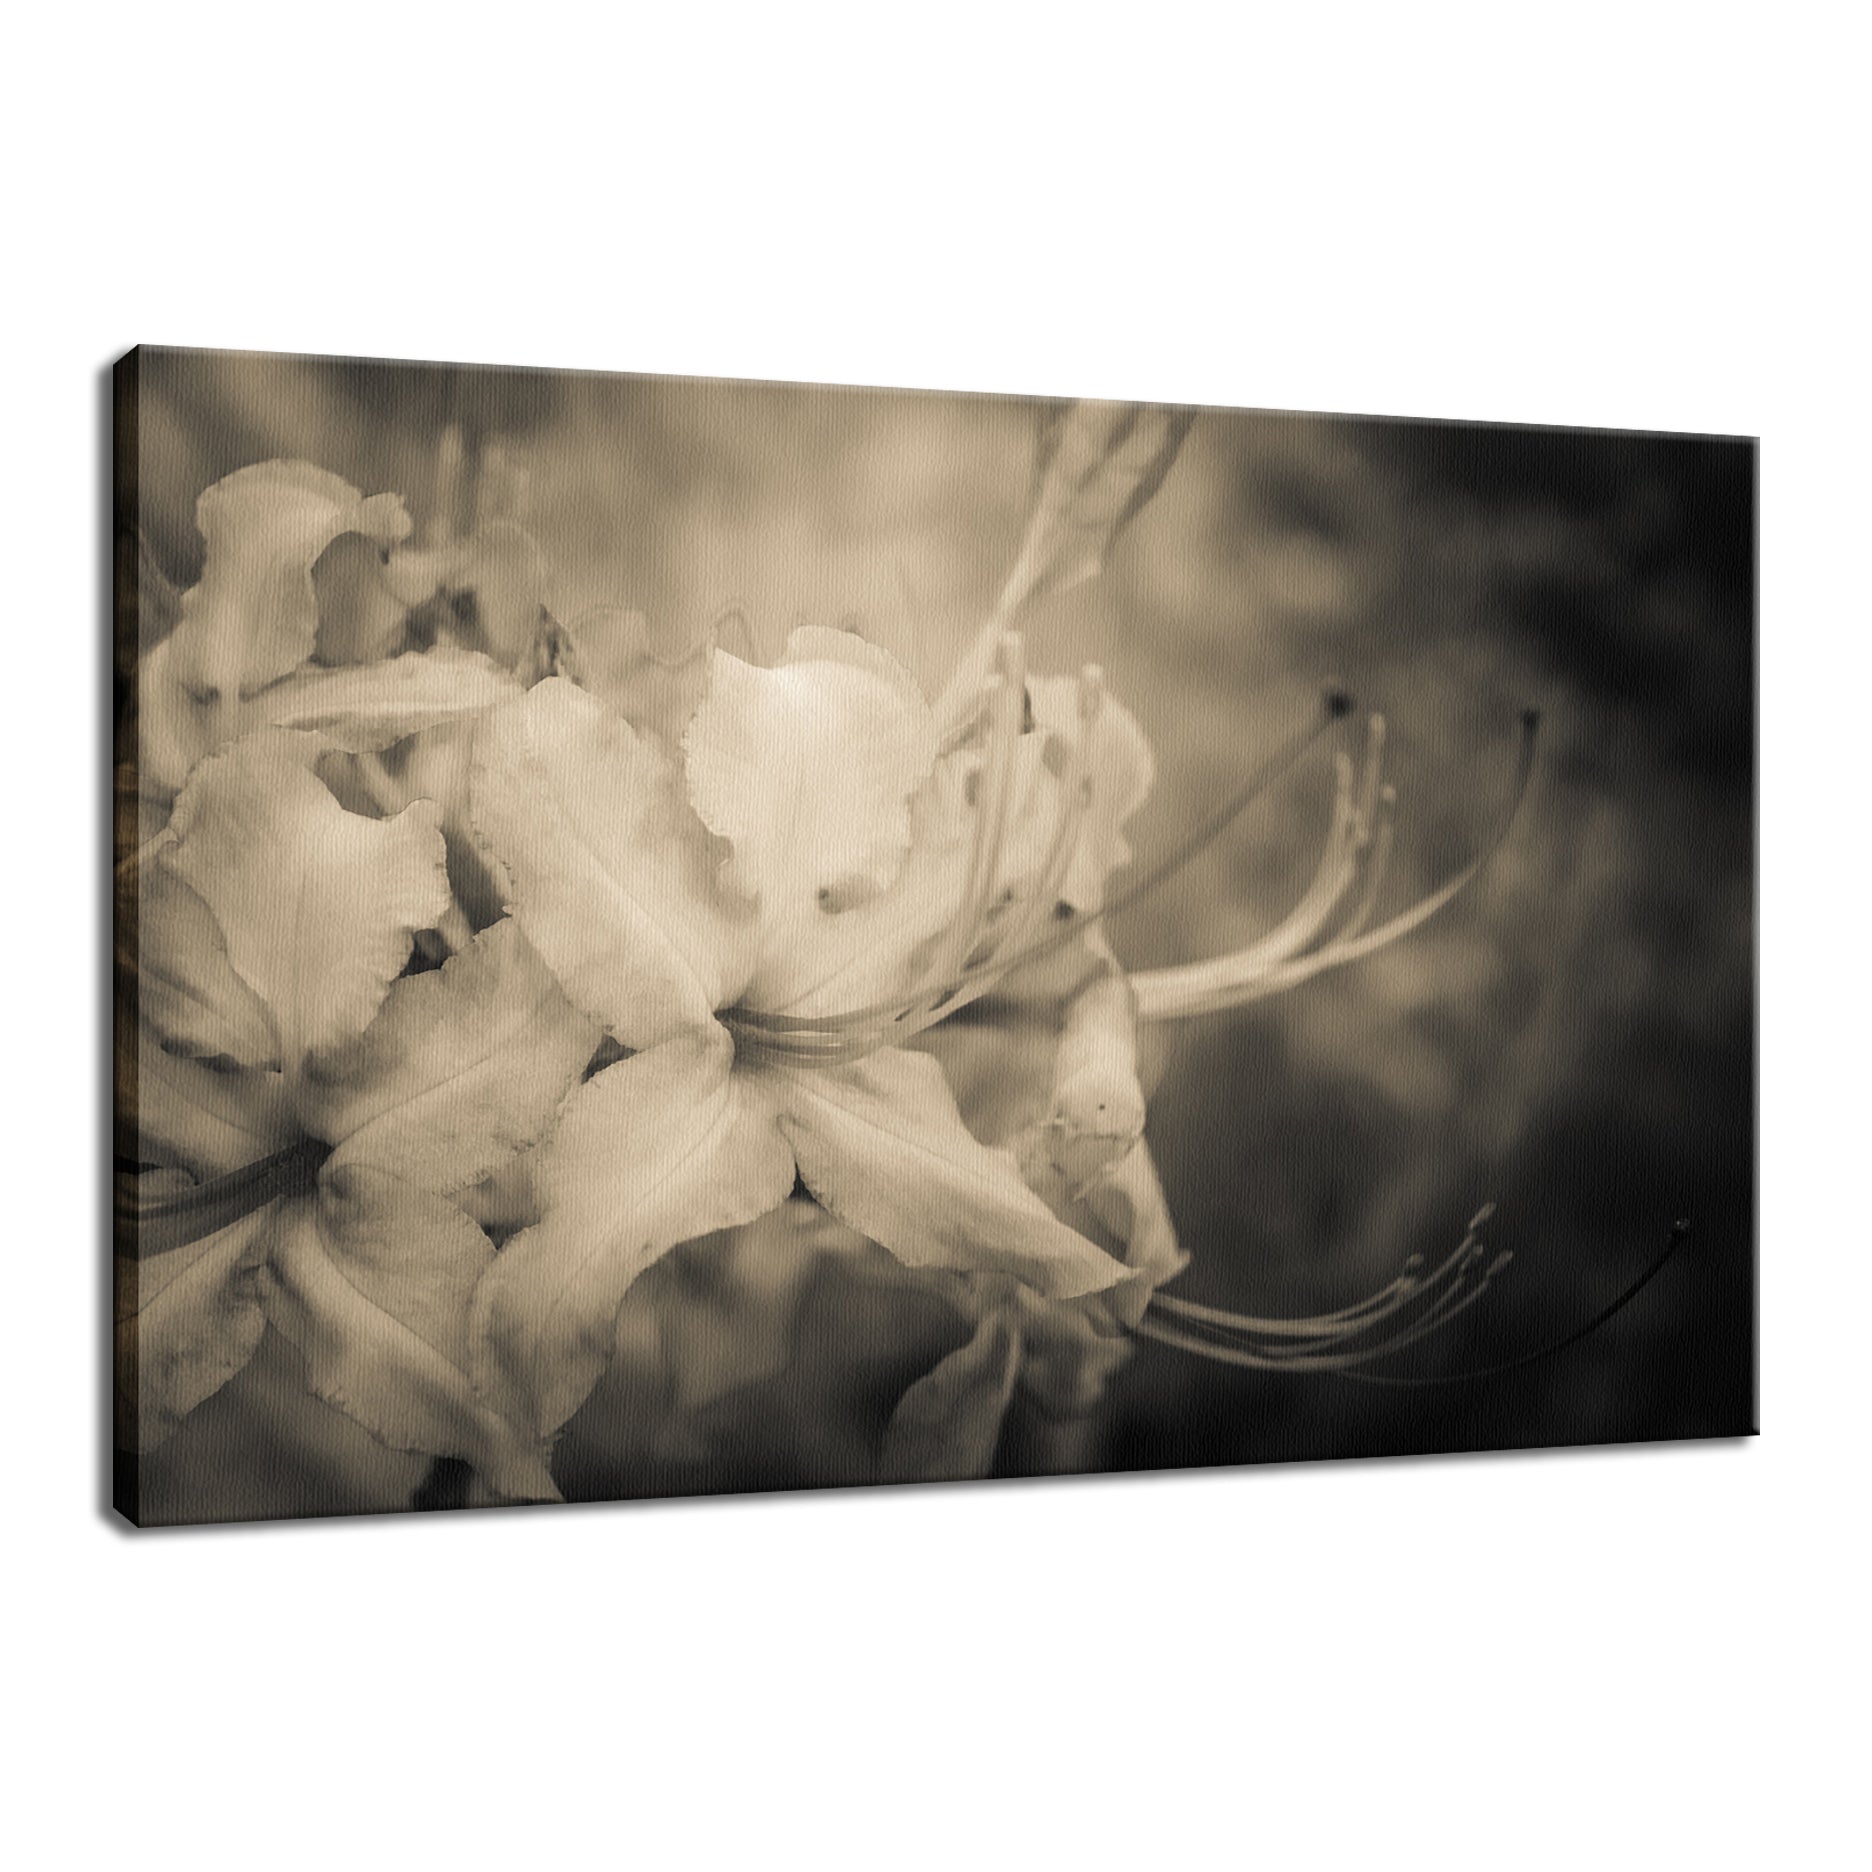 Sepia Aged Rhododendron Blooms Nature / Floral Photo Fine Art Canvas Wall Art Prints  - PIPAFINEART